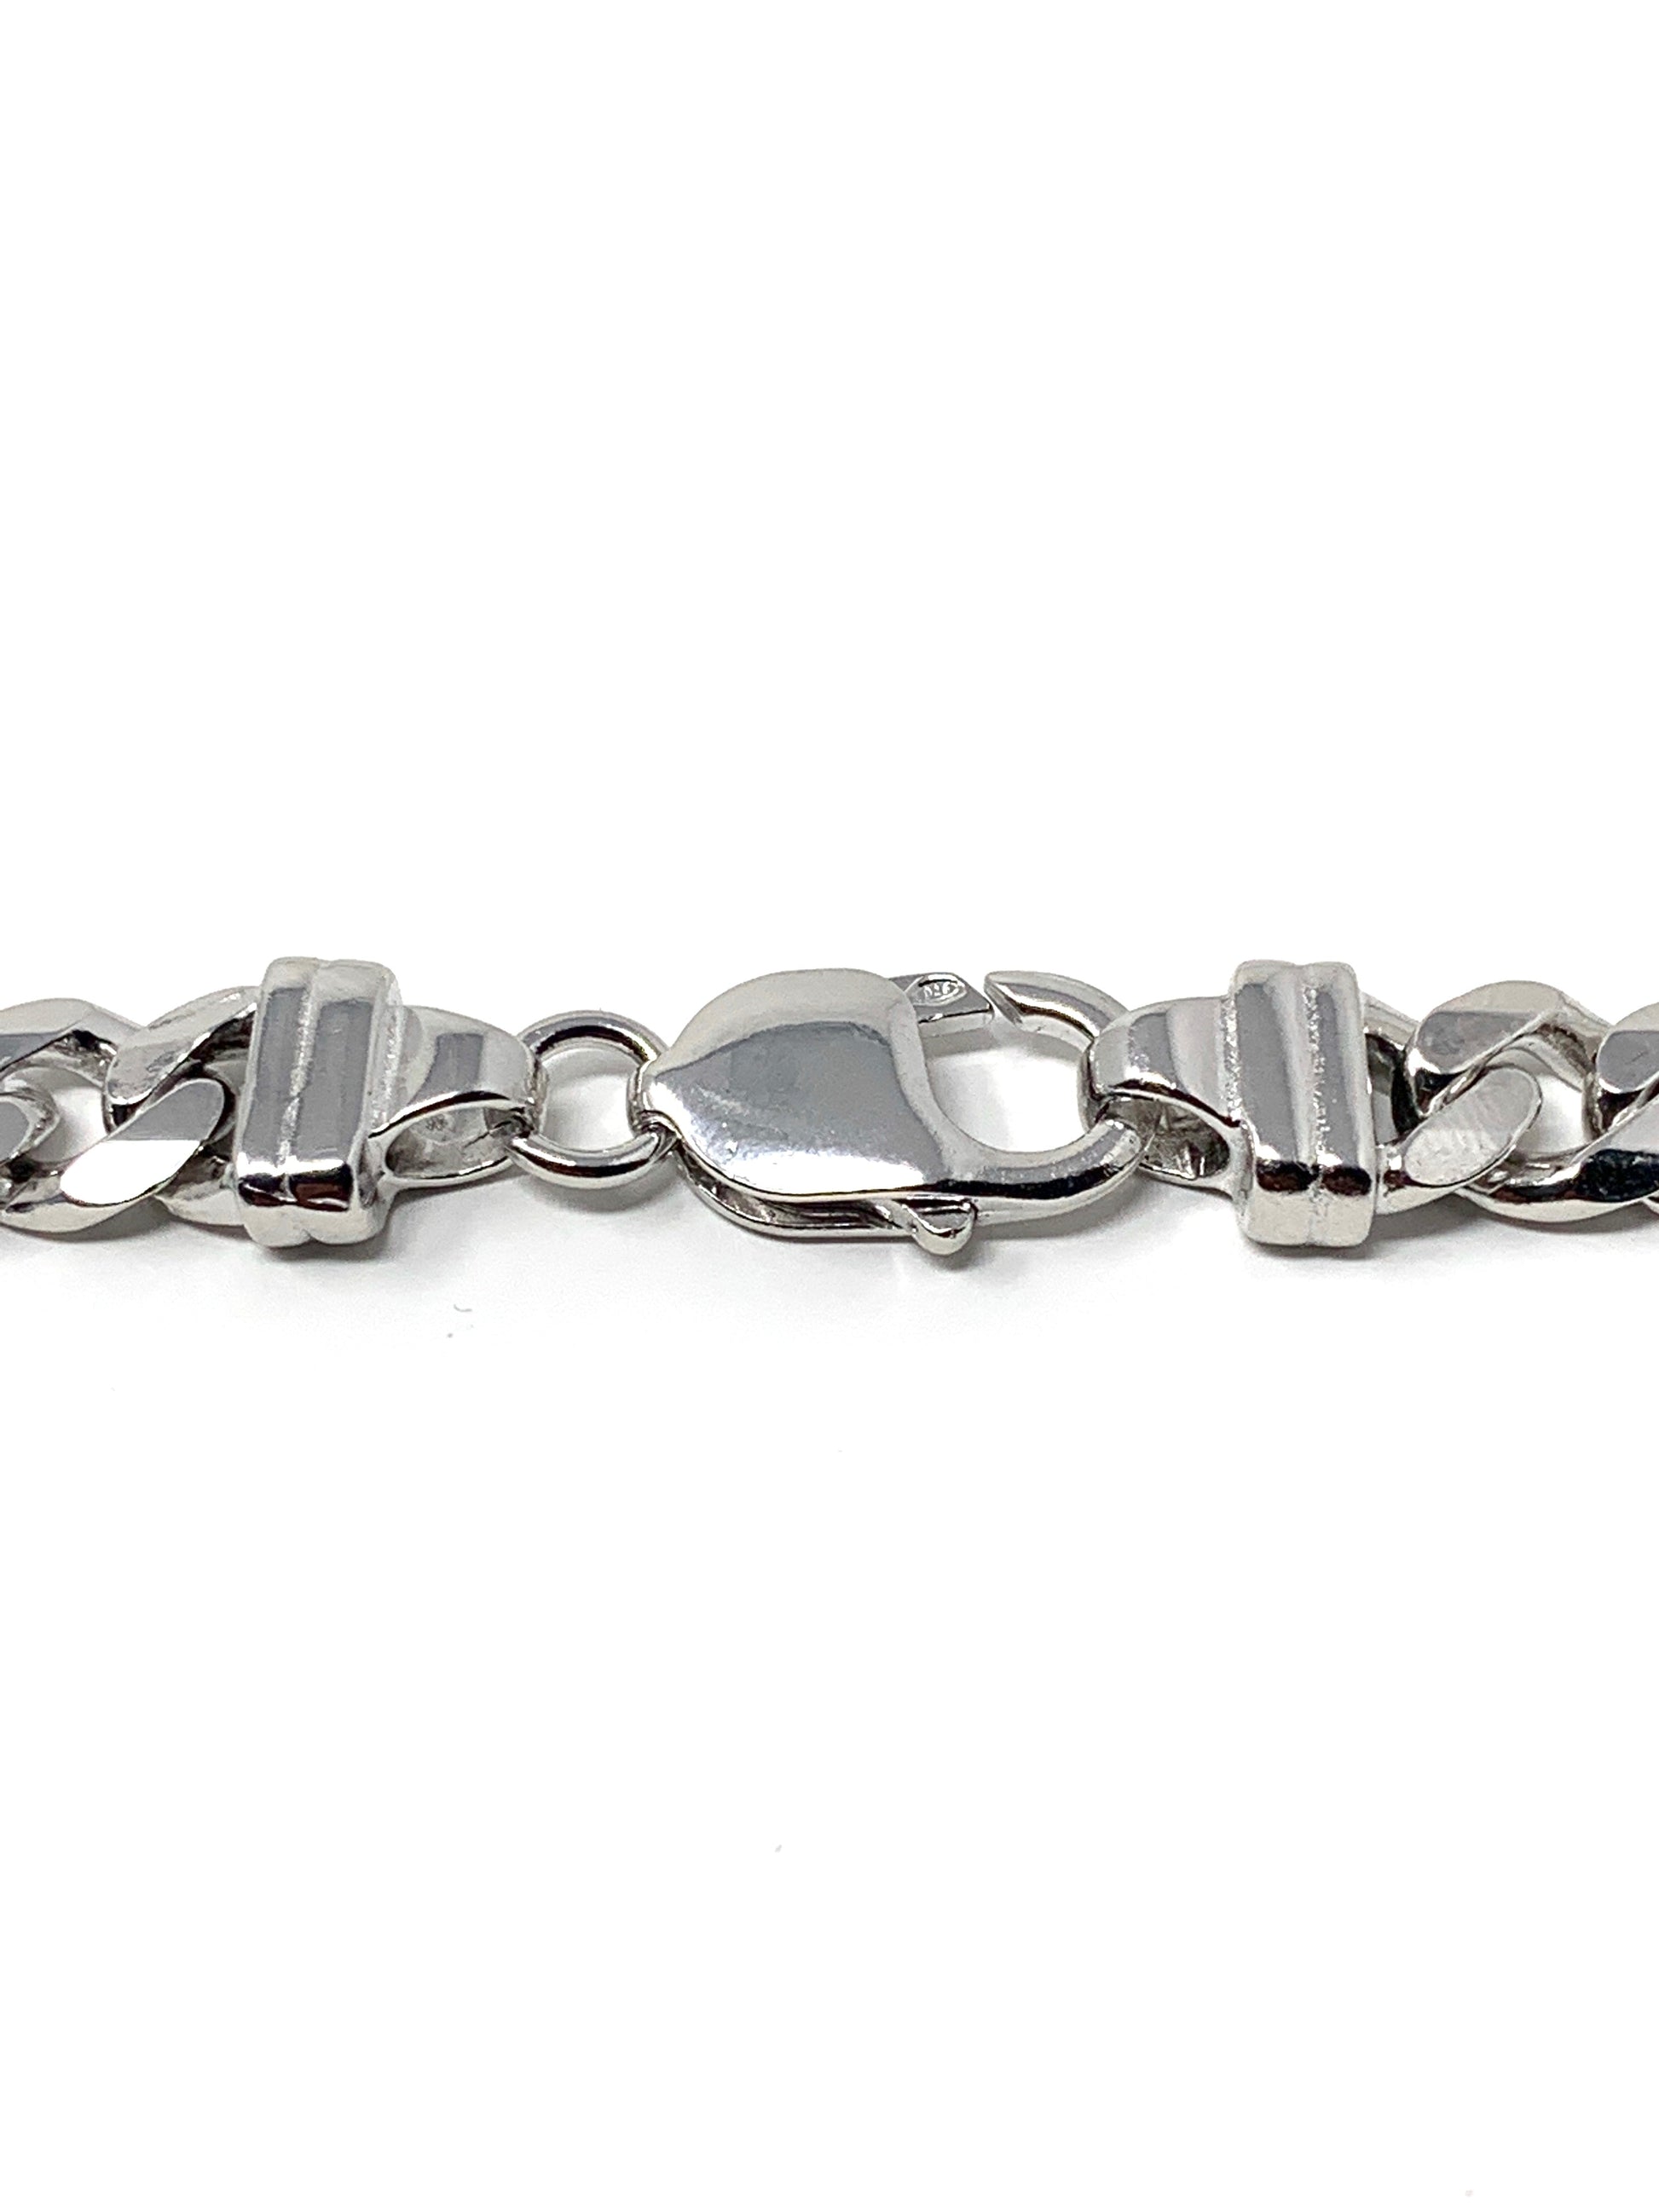 Cuban mens .925 silver link ,white gold plated necklace - Luxury Diaz